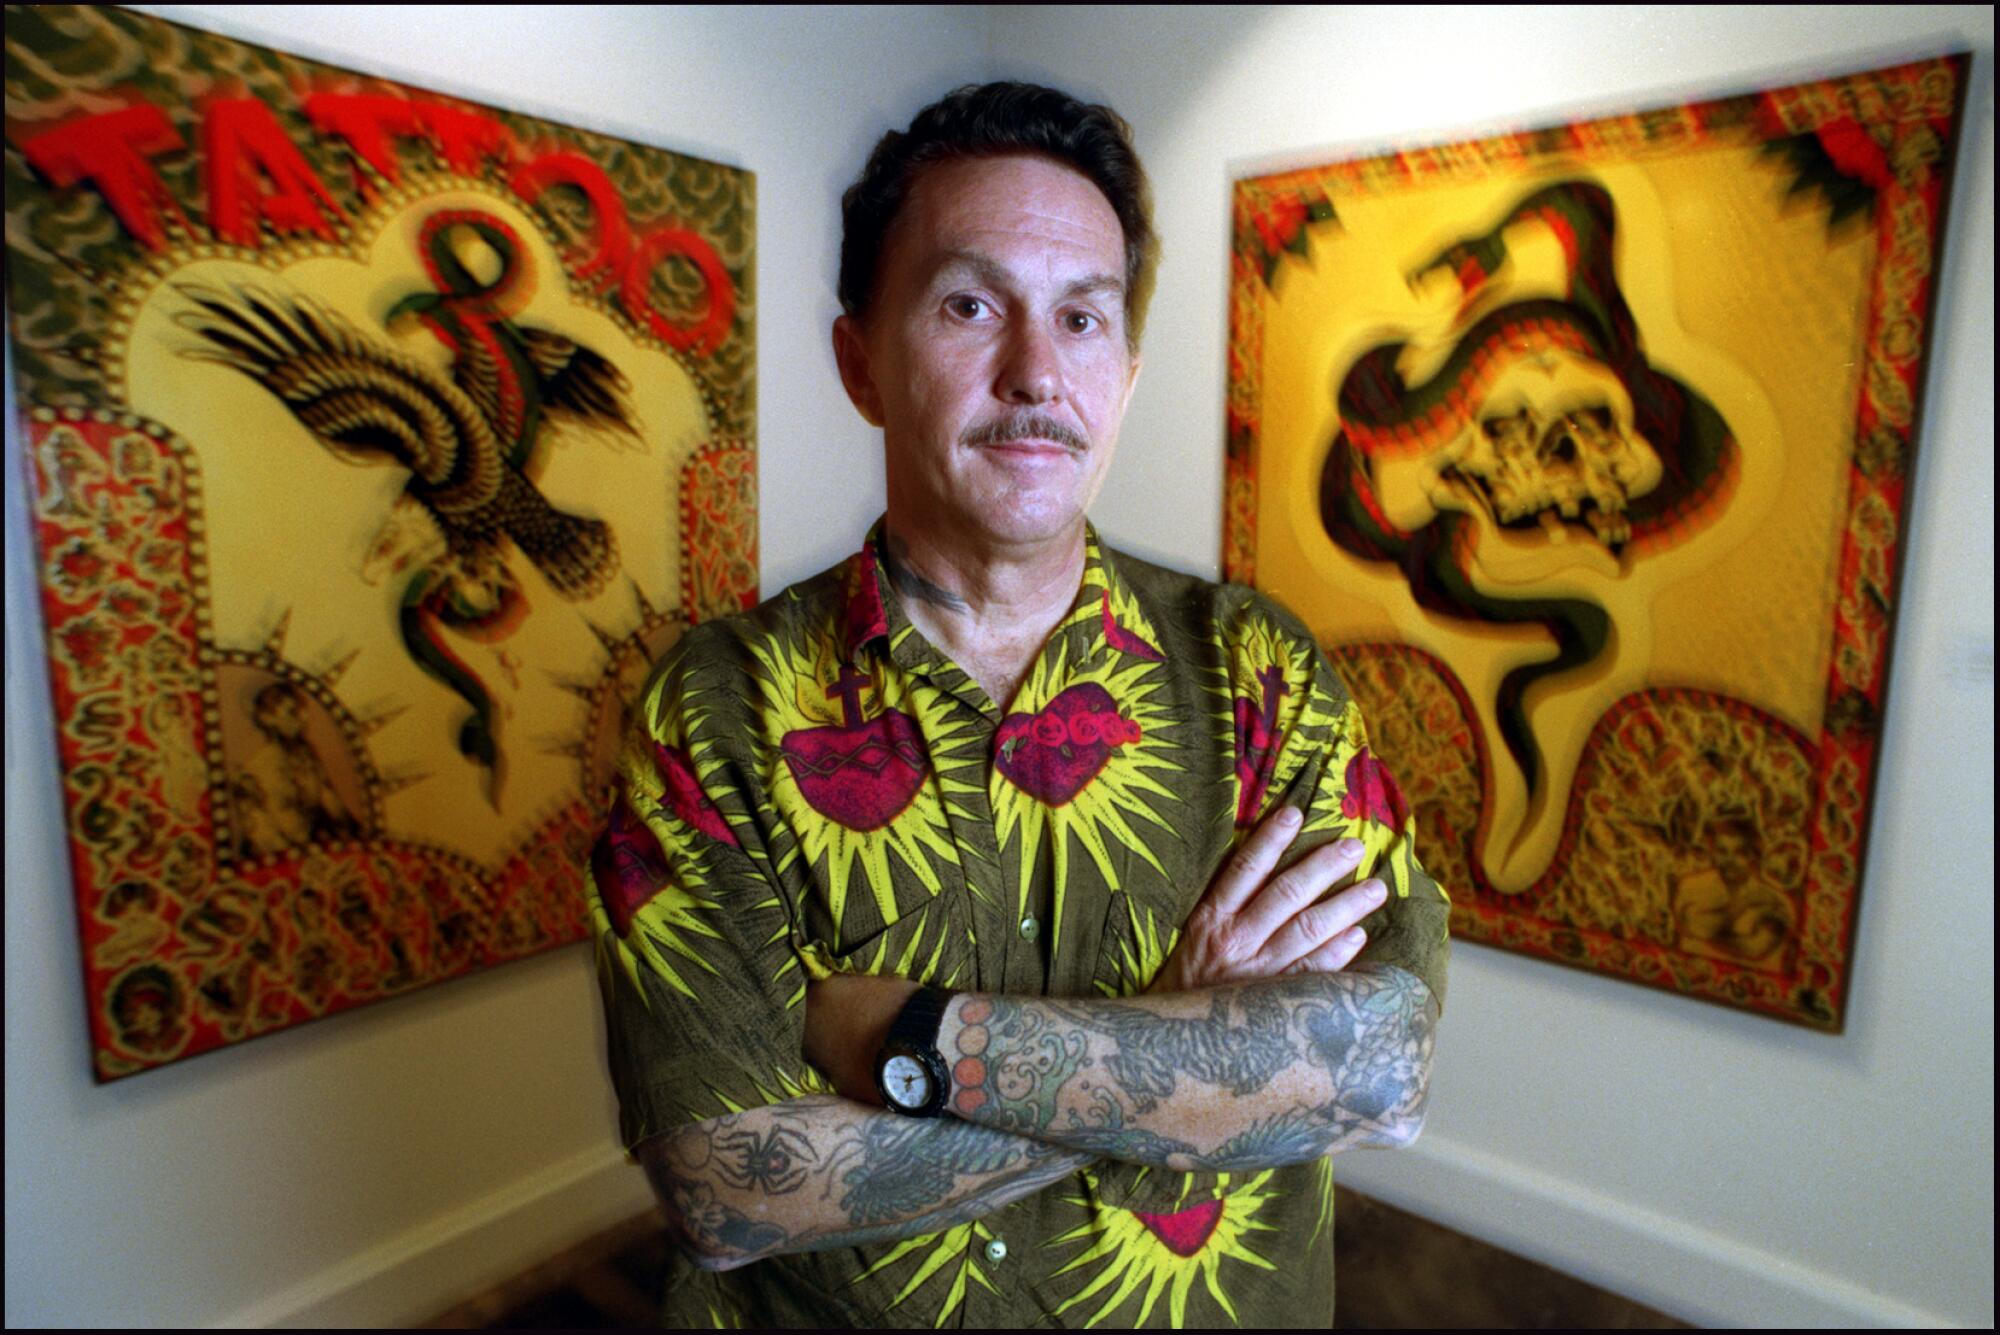 Don Ed Hardy stands before two panels of tattoo art, which also covers his shirt and both arms.